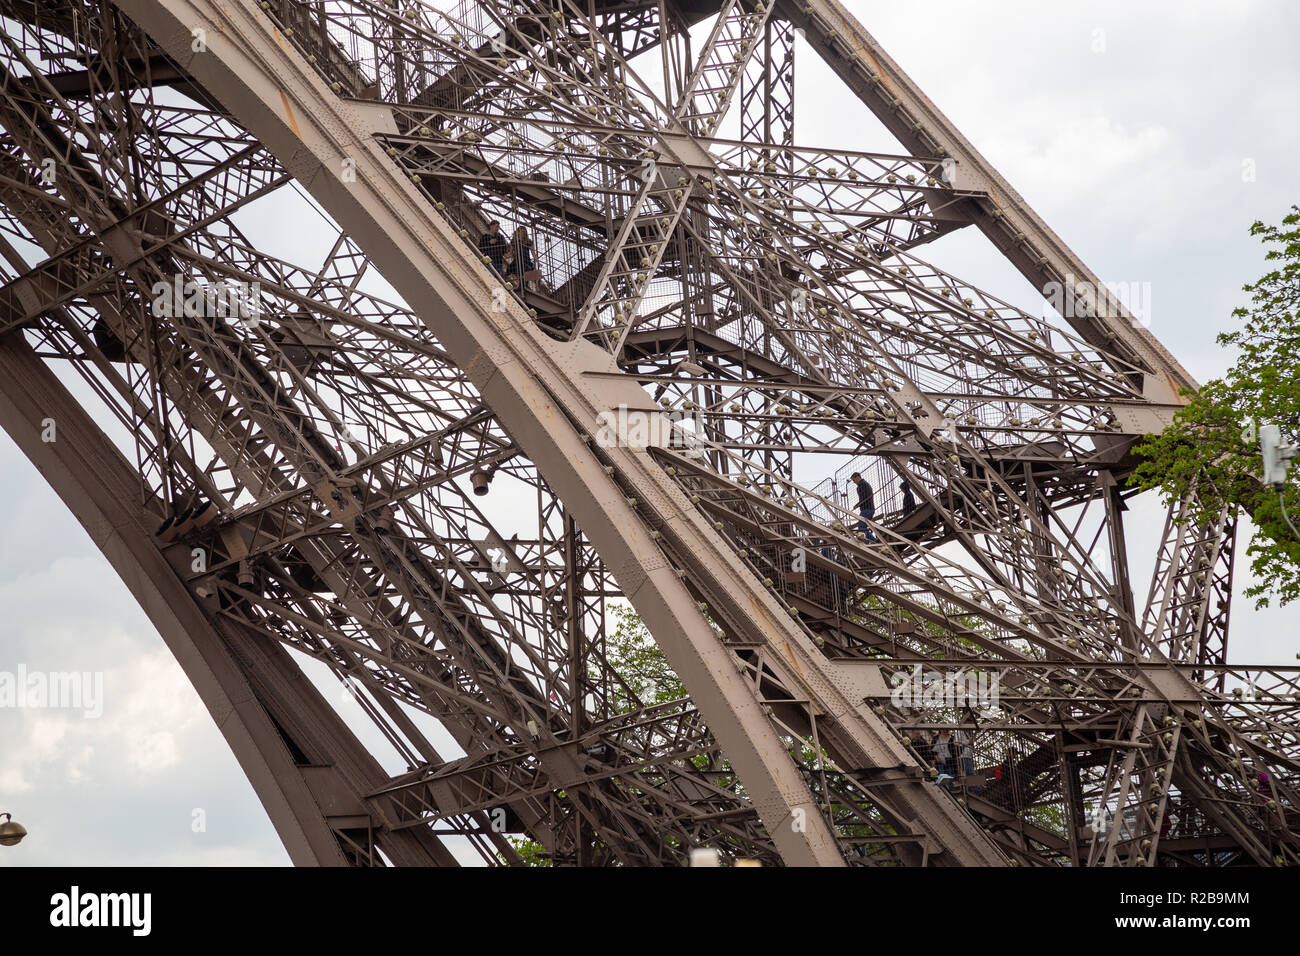 Paris/France - April 22nd 2017: People climbing the Eiffel Tower stairs Stock Photo